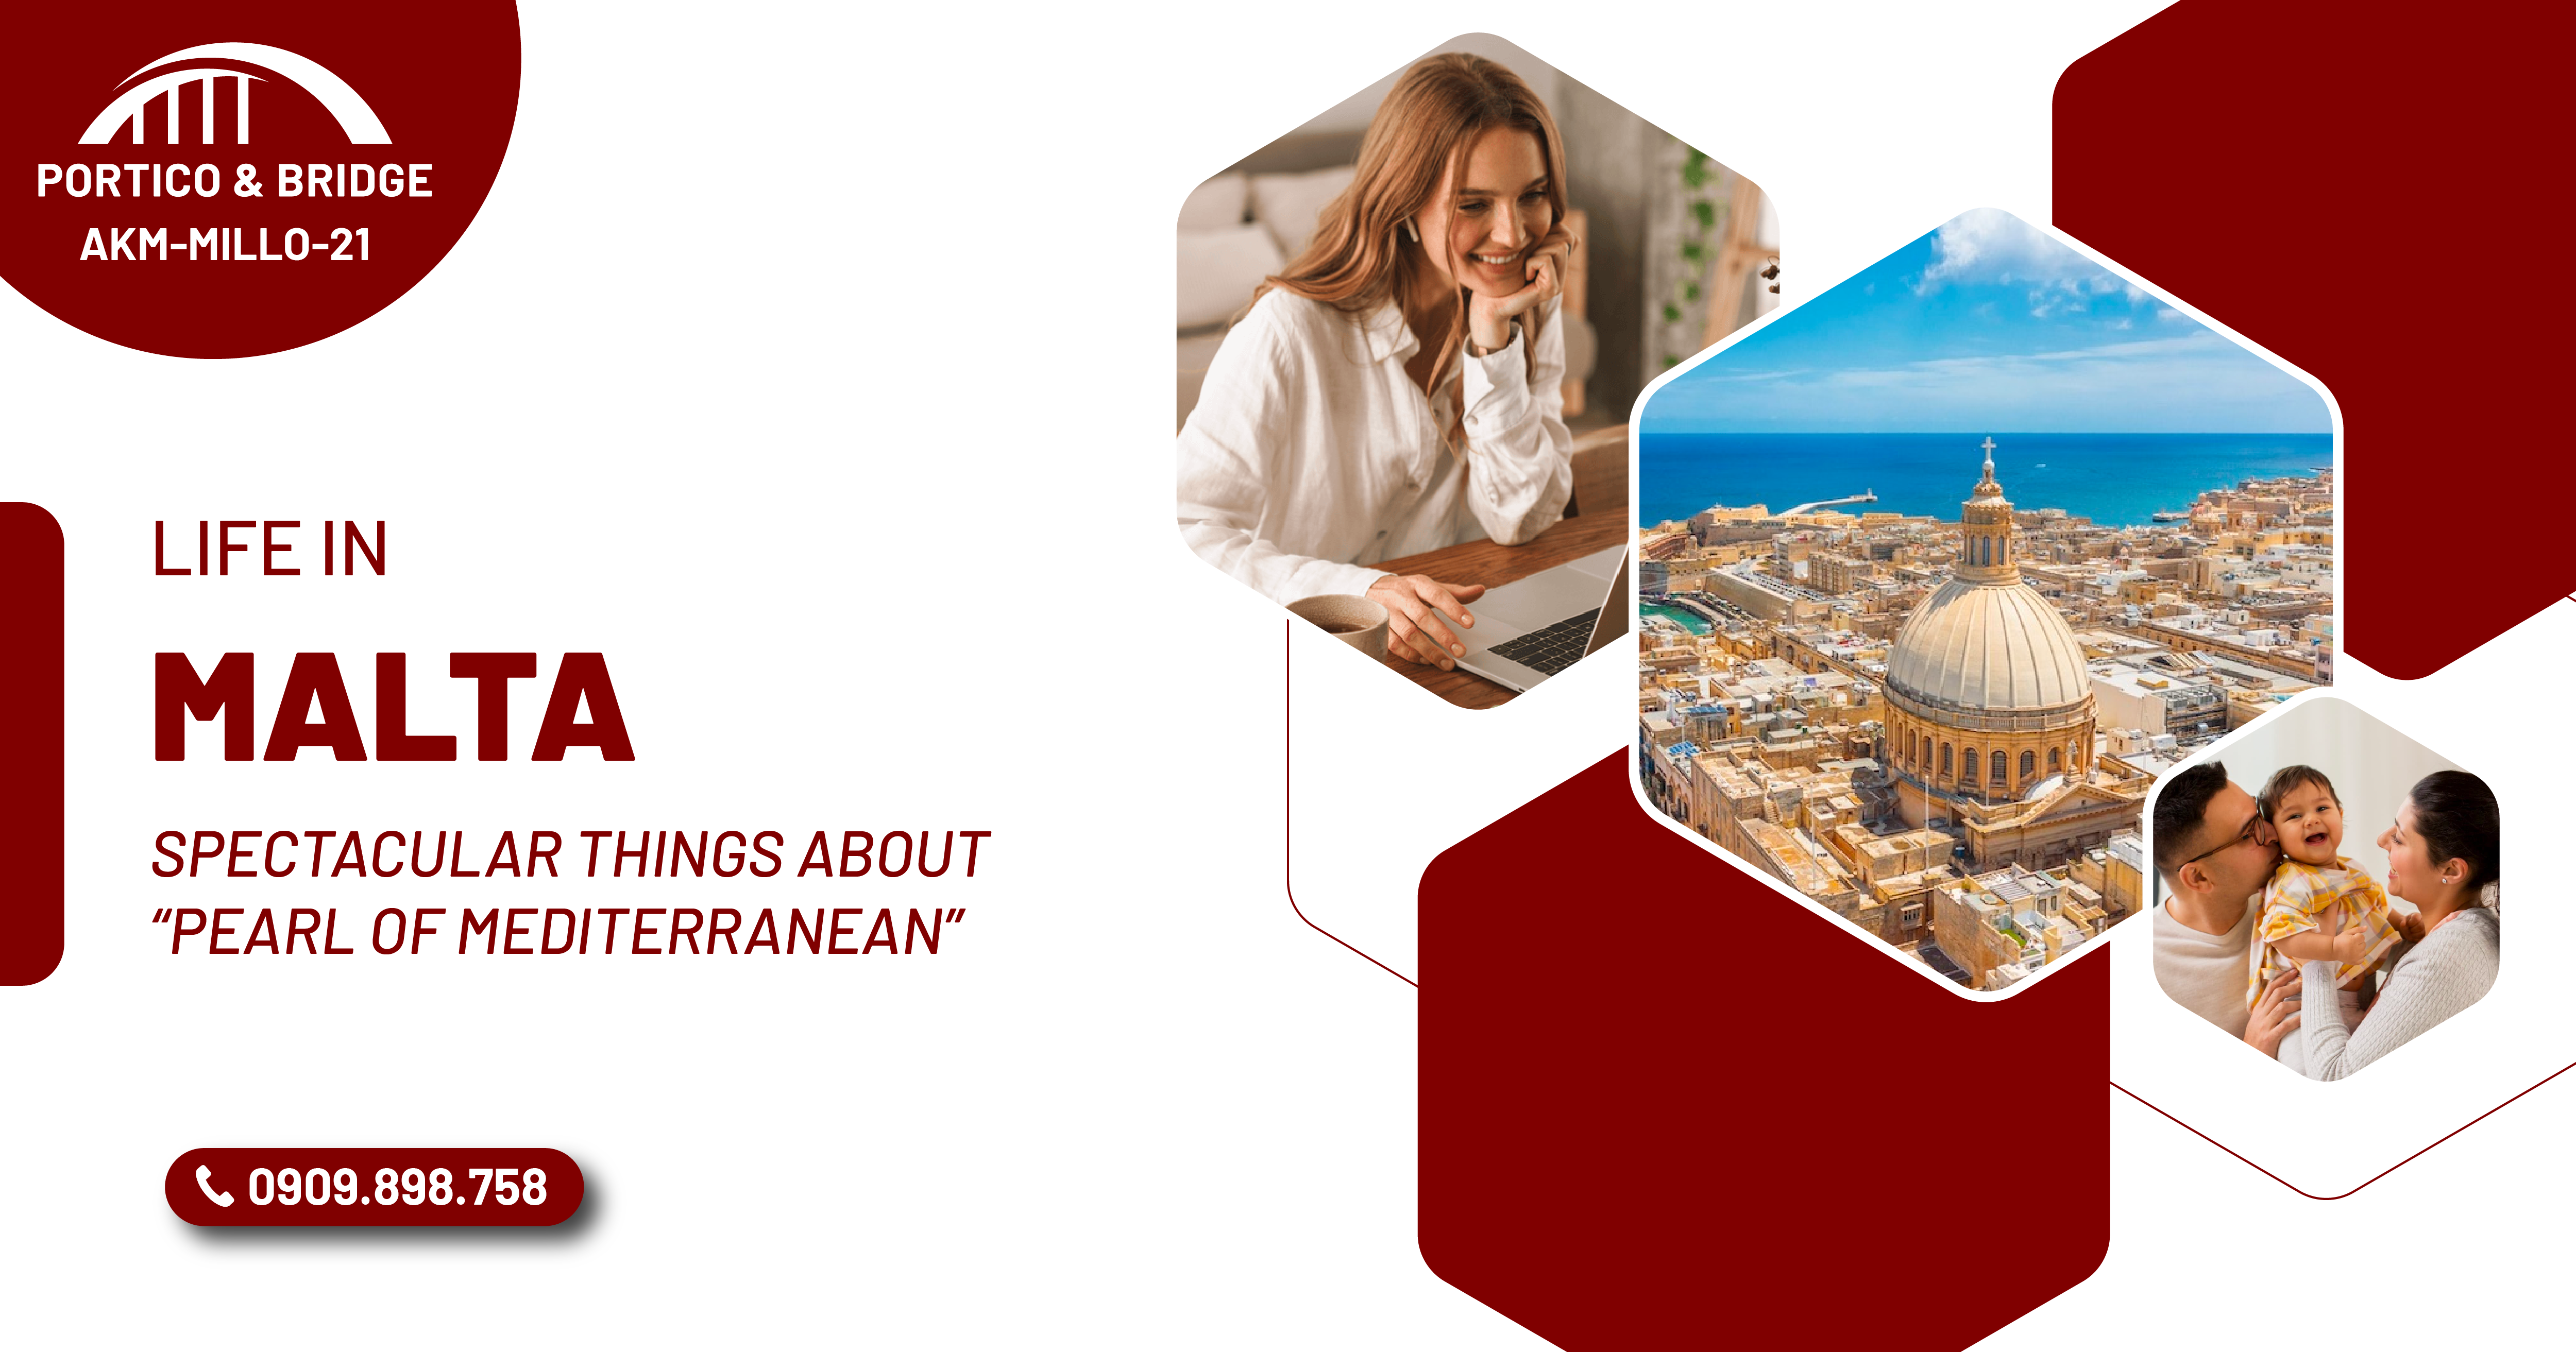 LIFE IN MALTA – SPECTACULAR THINGS ABOUT “PEARL OF MEDITERRANEAN”